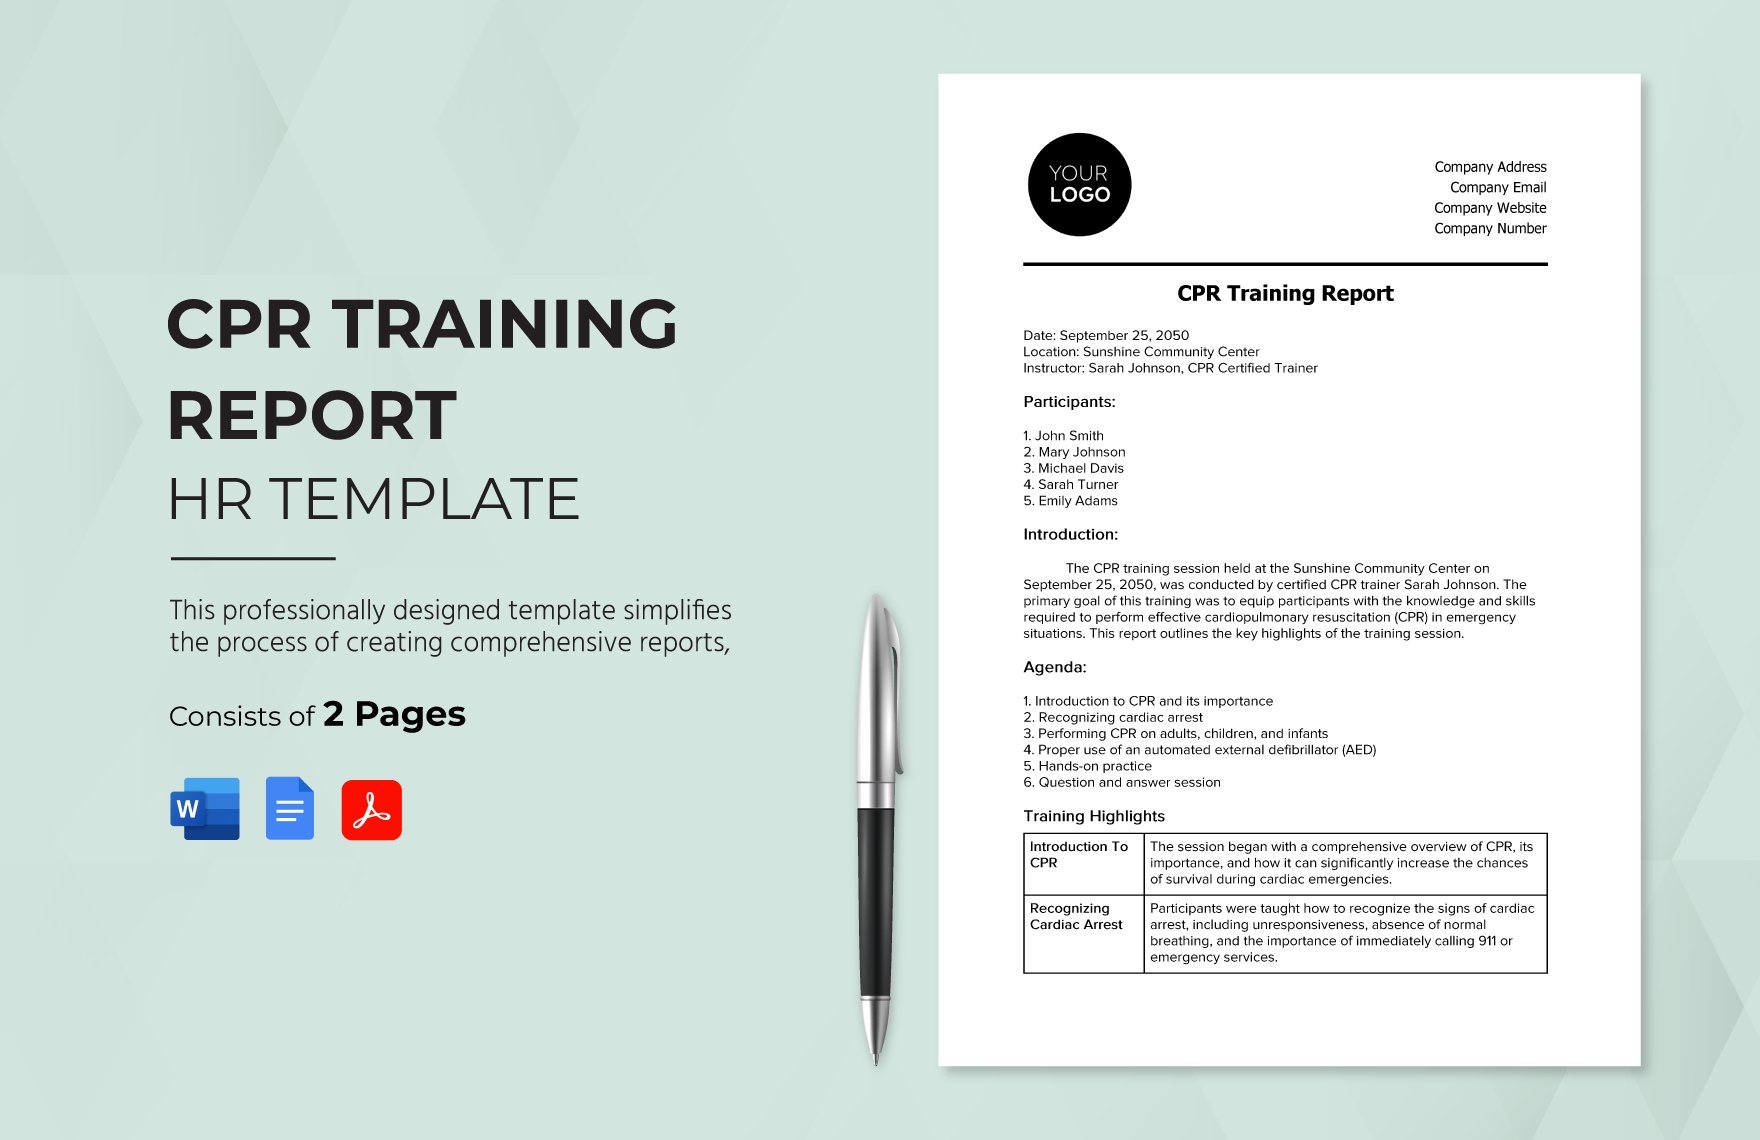 CPR Training Report HR Template